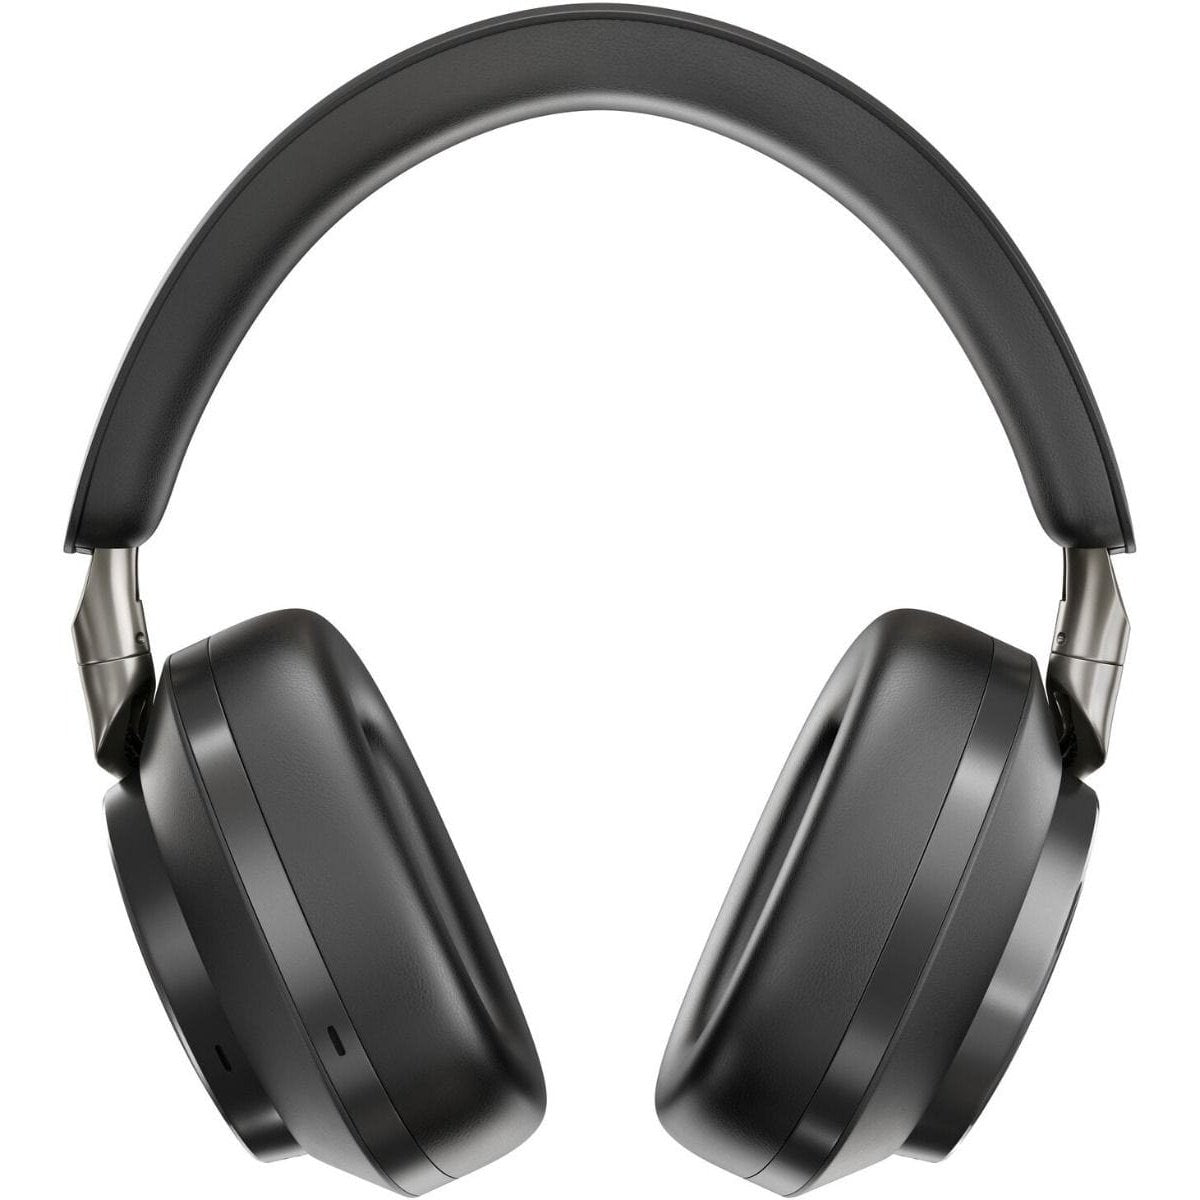 Bowers & Wilkins Bowers & Wilkins PX8 Luxury Noise Cancelling Headphones Headphones and Accessories